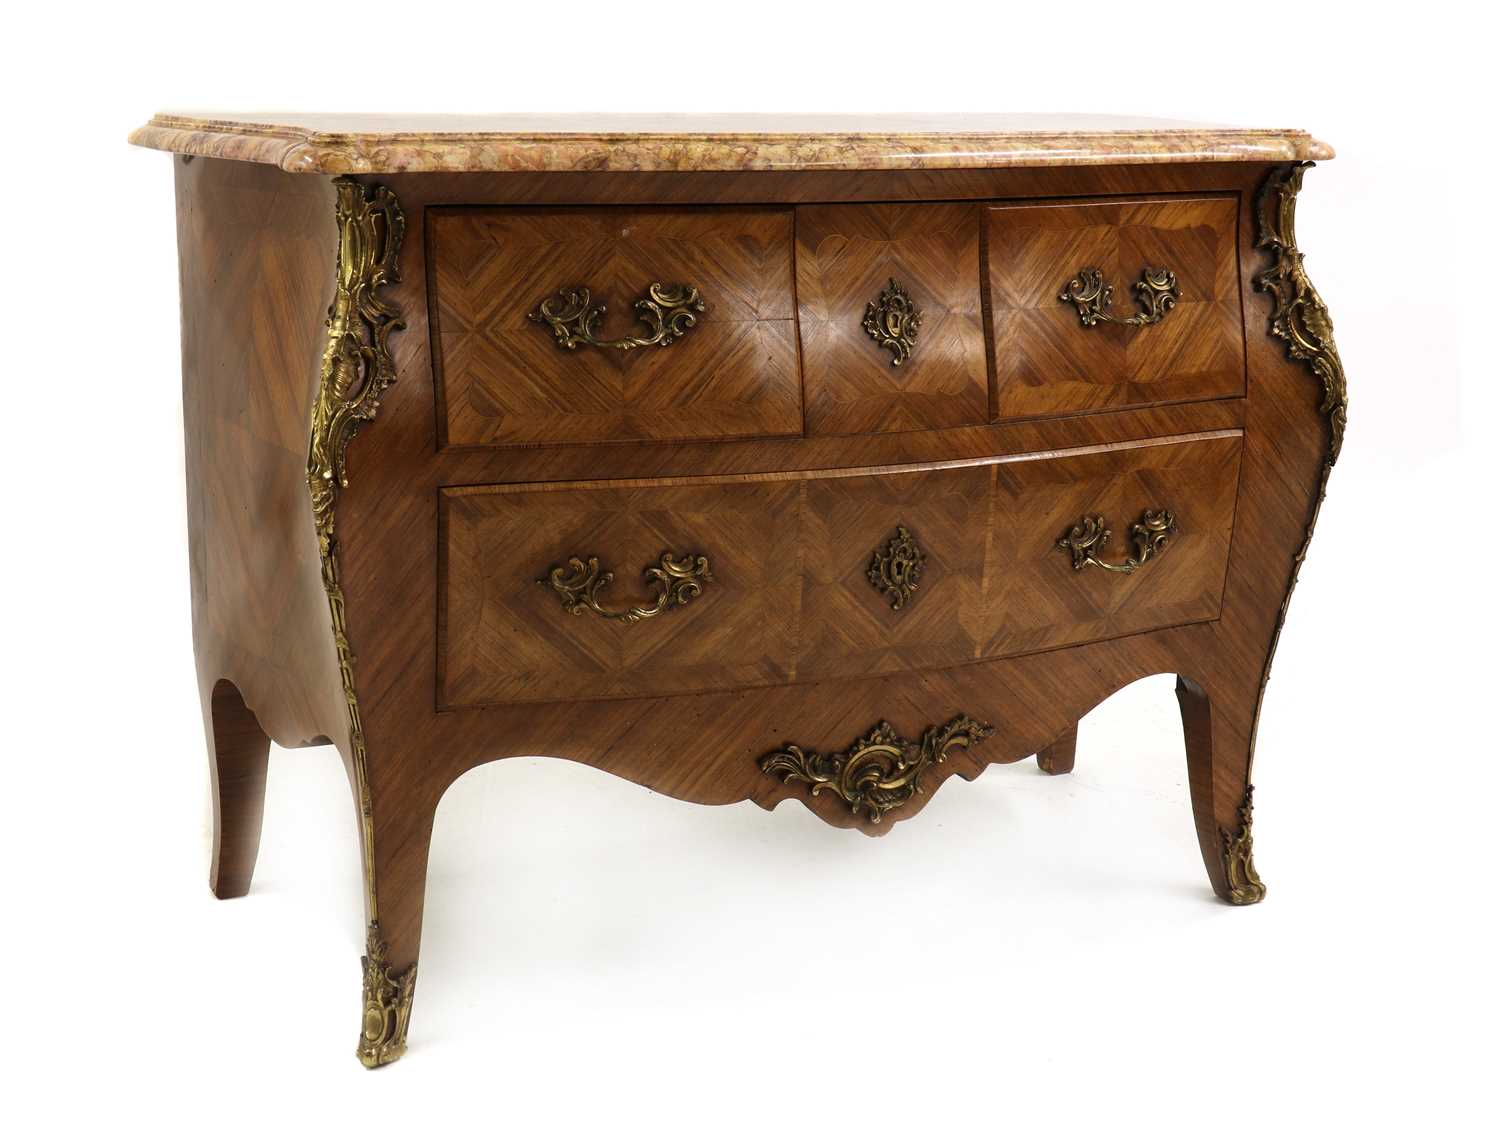 French Marbled top Commode. Town and Country Antiques.